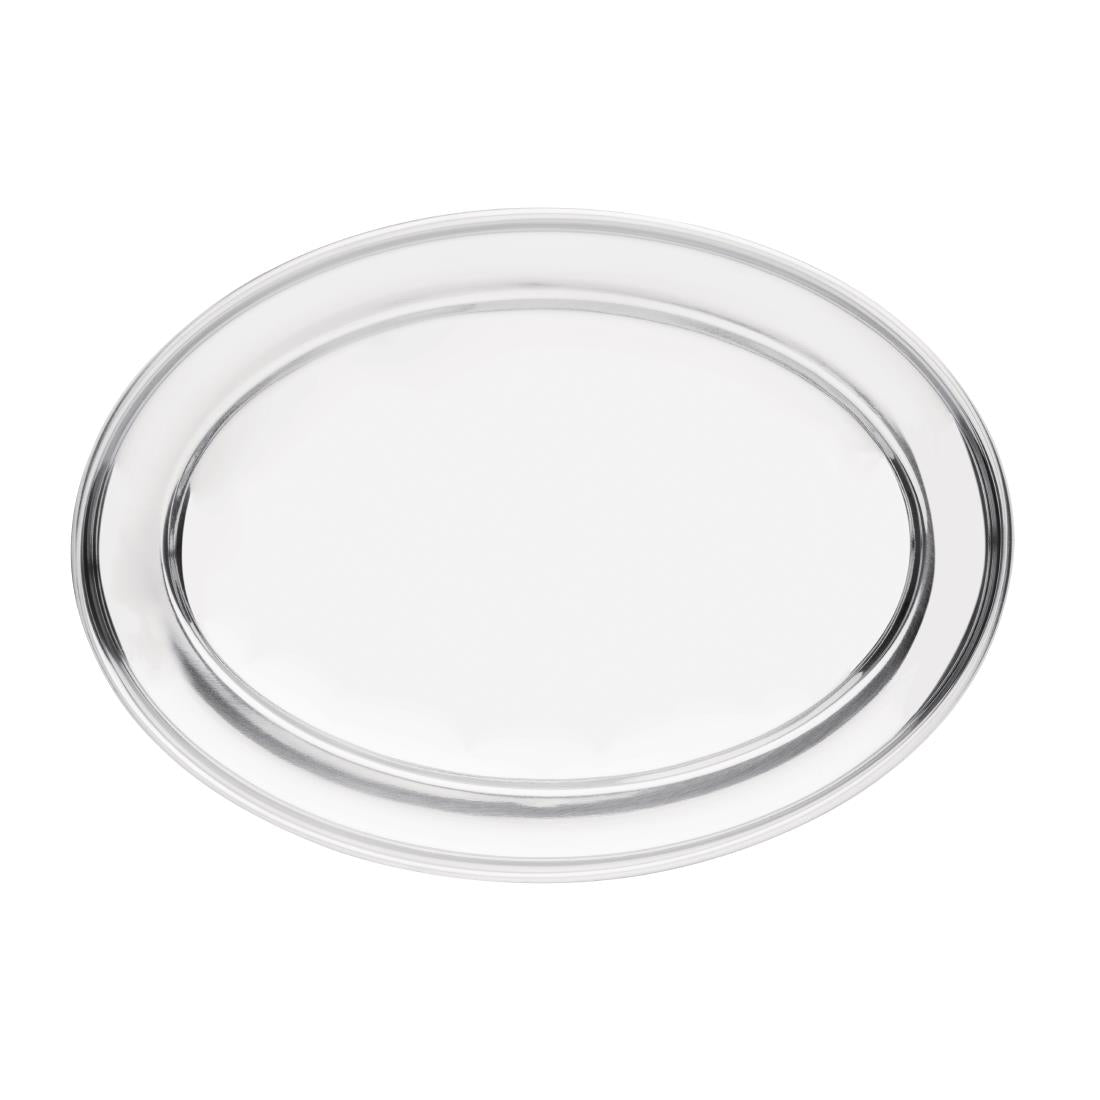 K365 Olympia Stainless Steel Oval Serving Tray 400mm K365